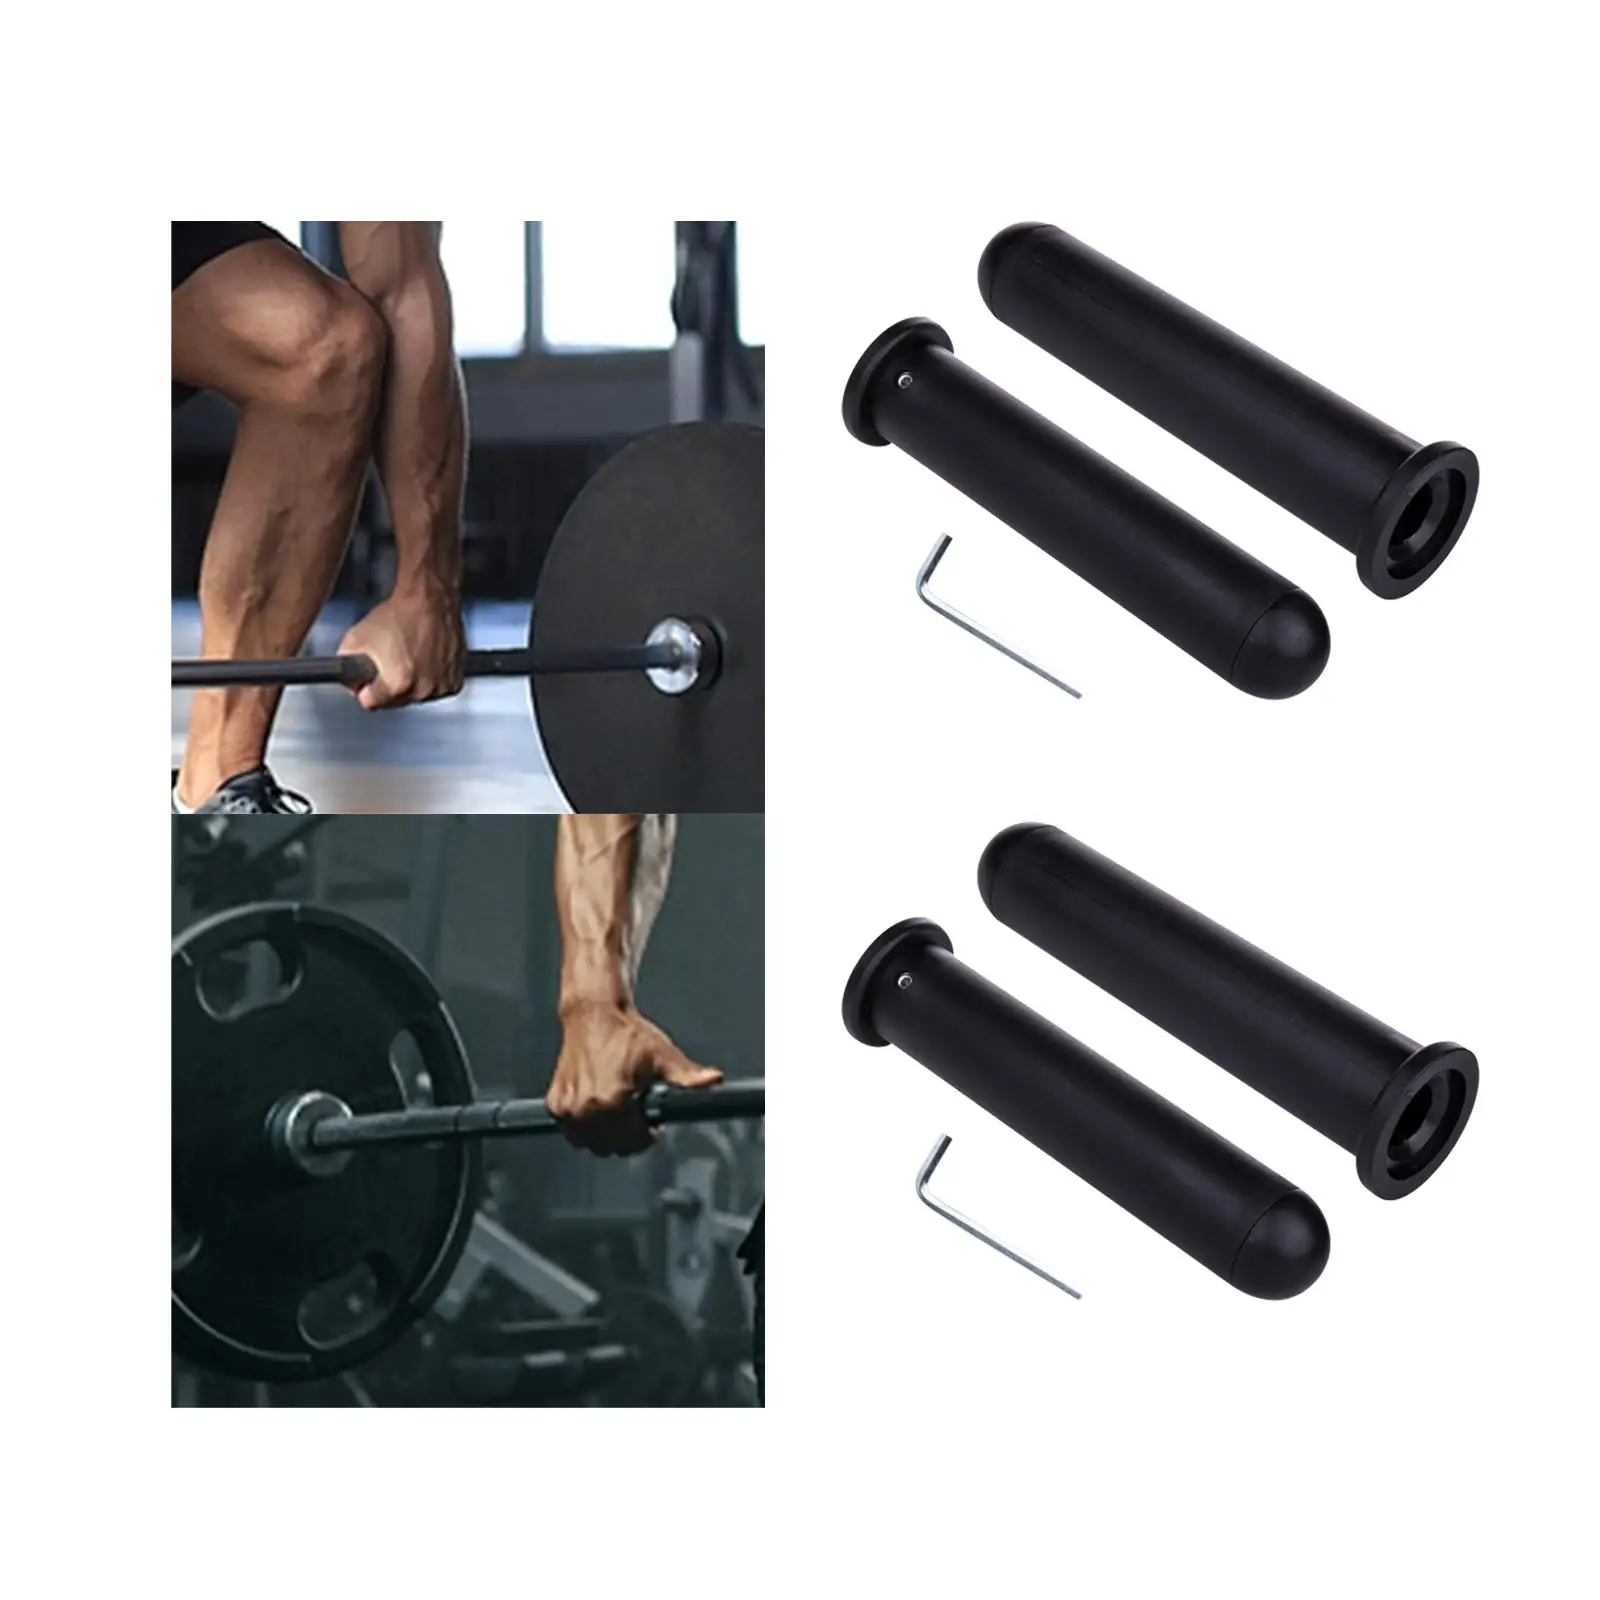 Barbell Adapter Sleeves Barbell Bar Workout Exercise Equipment Weight Bars Adapter for Home Gym Practice Weightlifting Fitness